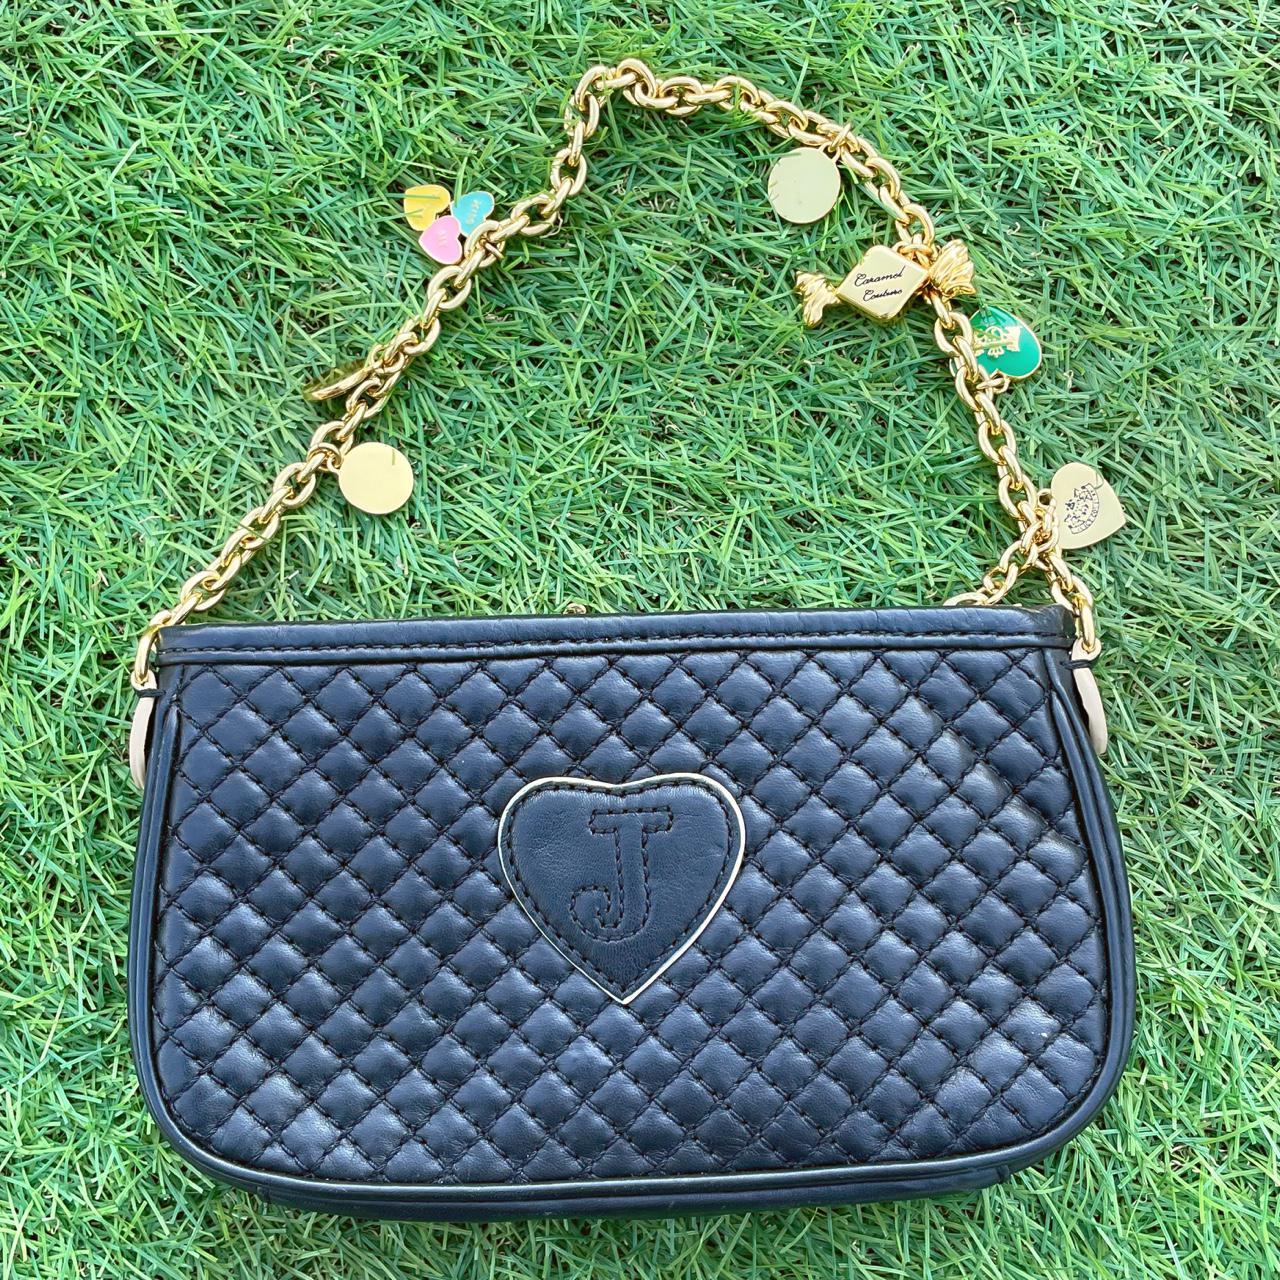 Product Image 2 - 🖤
Juicy Couture black leather cloth